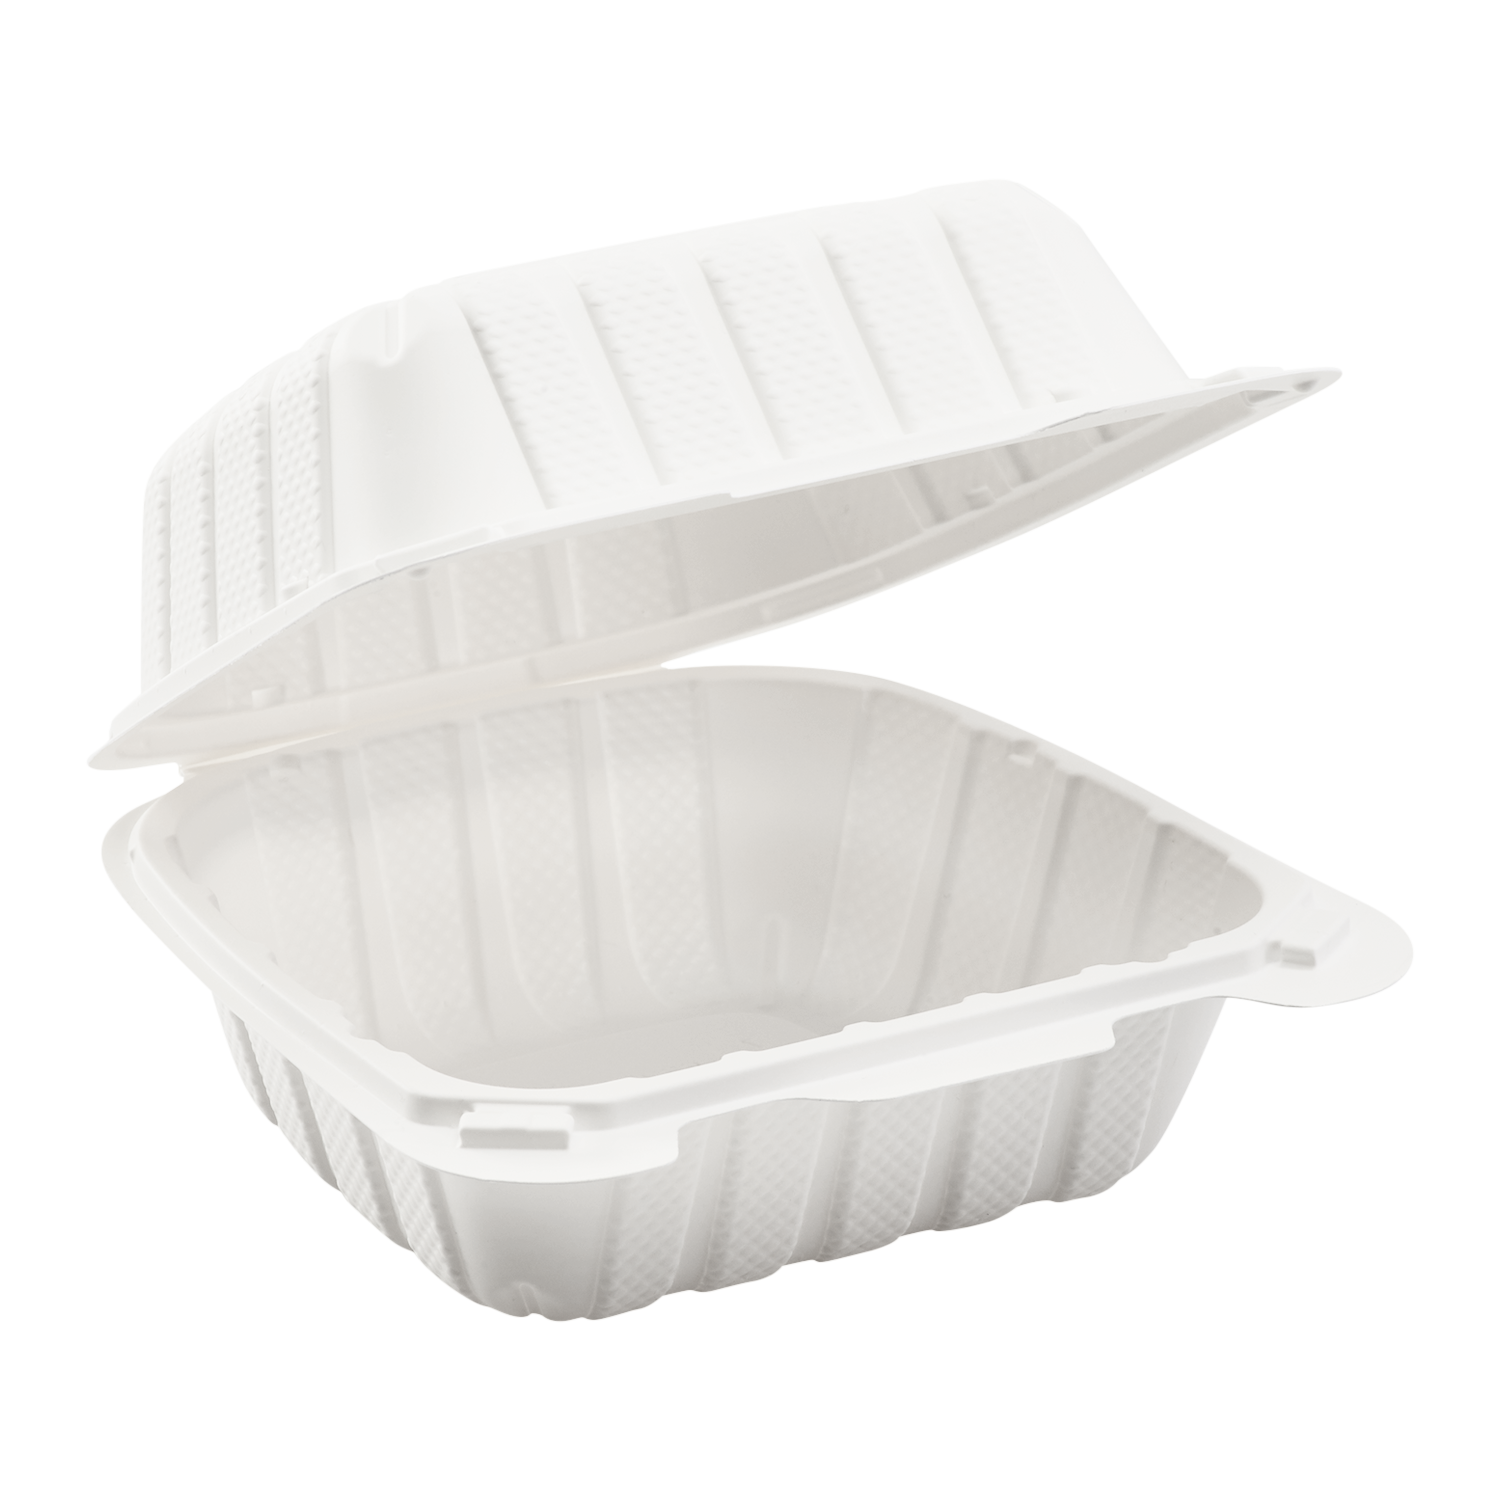 Square Microwaveable White Hinged Take-Out Container - 6 x 6